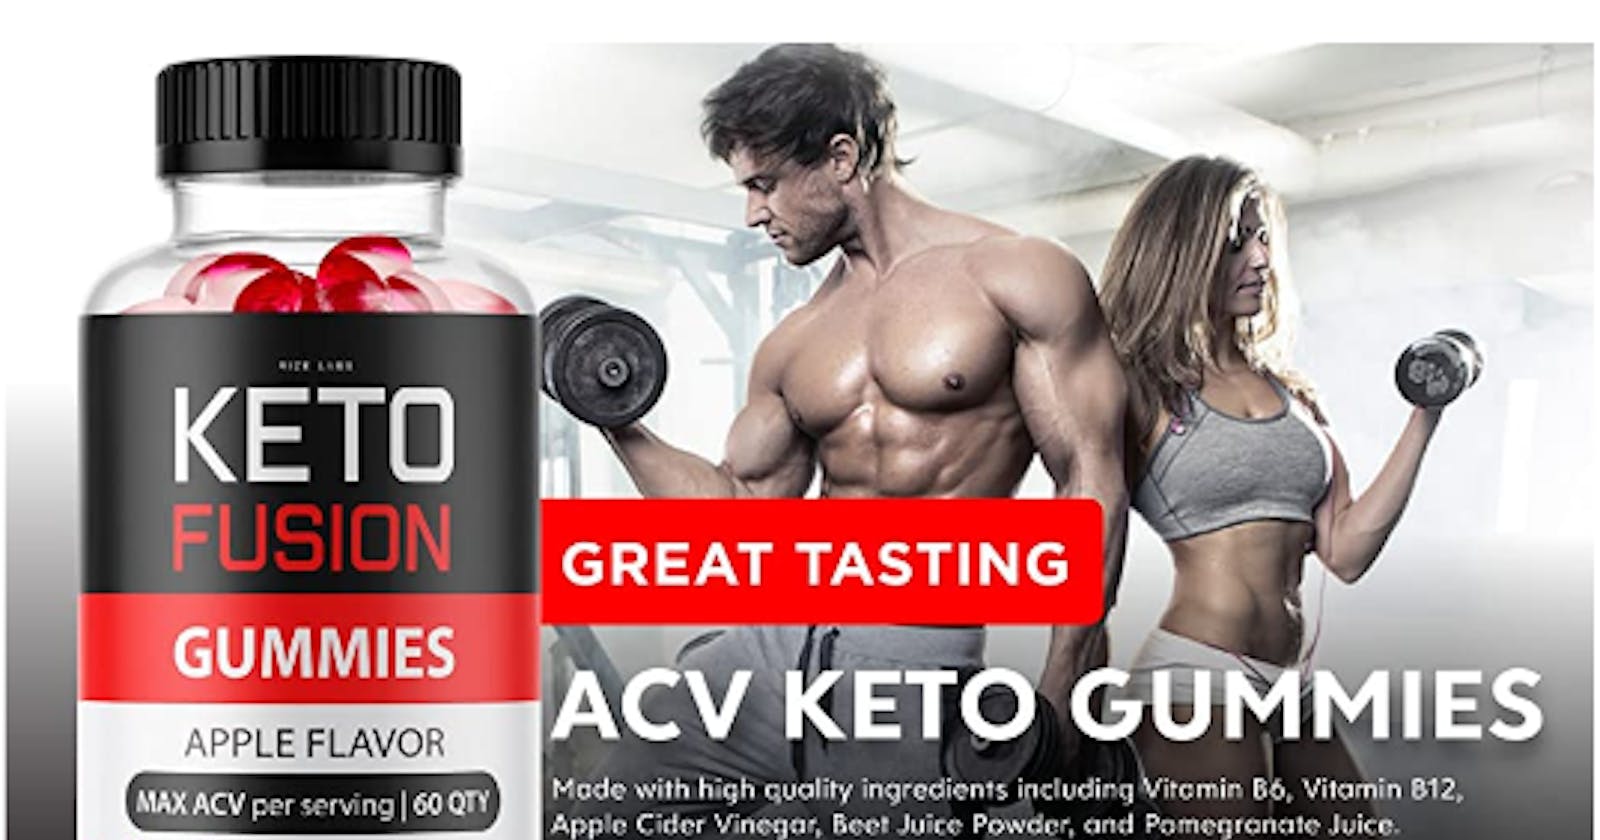 Keto Fusion Gummies Reviews (USA): Is It Legitimate Or Scammer?